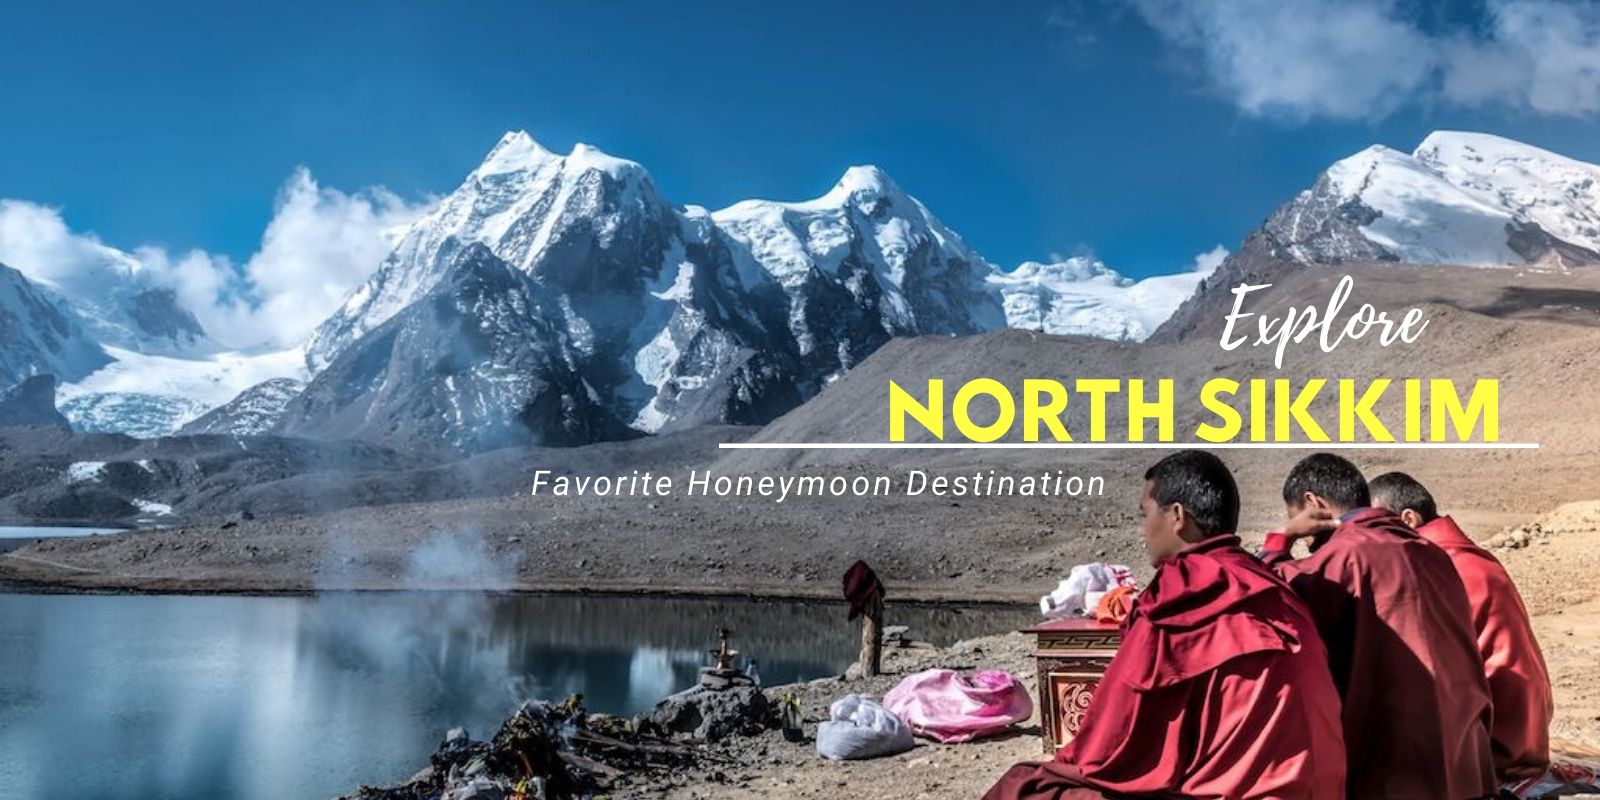 Why North Sikkim is the Favorite Honeymoon Destination for the Indian Couples